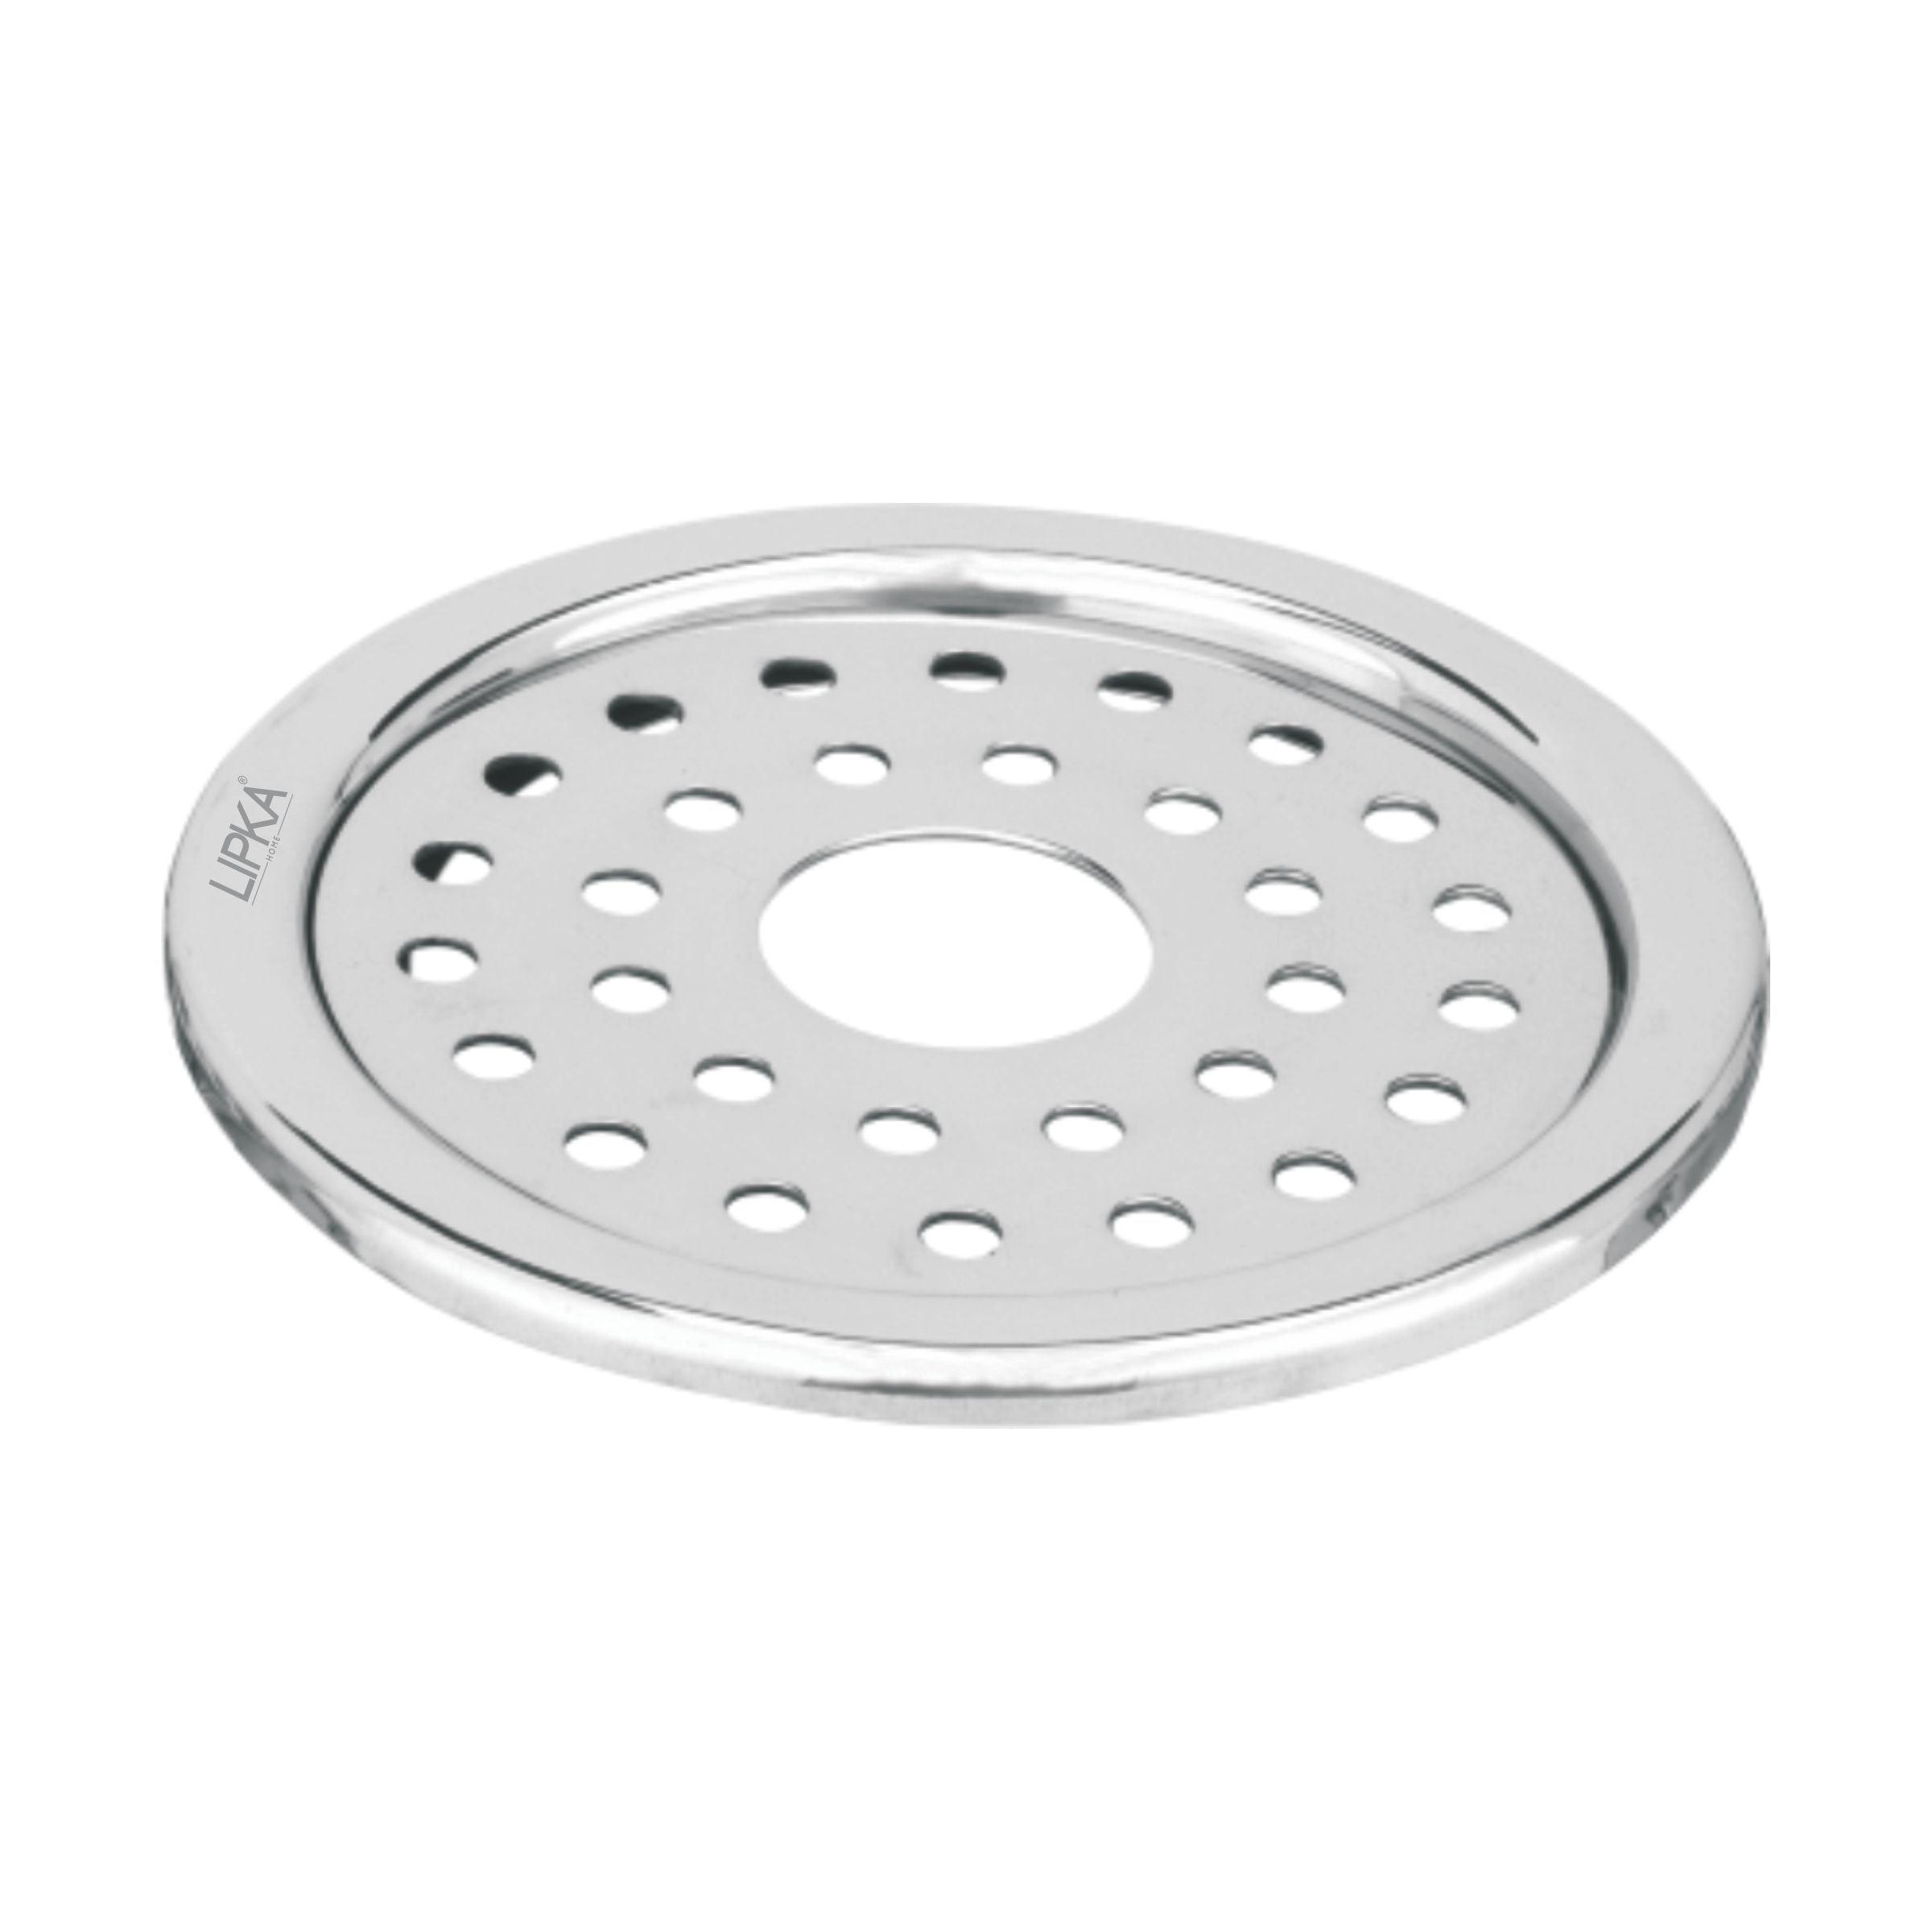 Eon Round Floor Drain with Plain Jali & Hole (5 inches) 